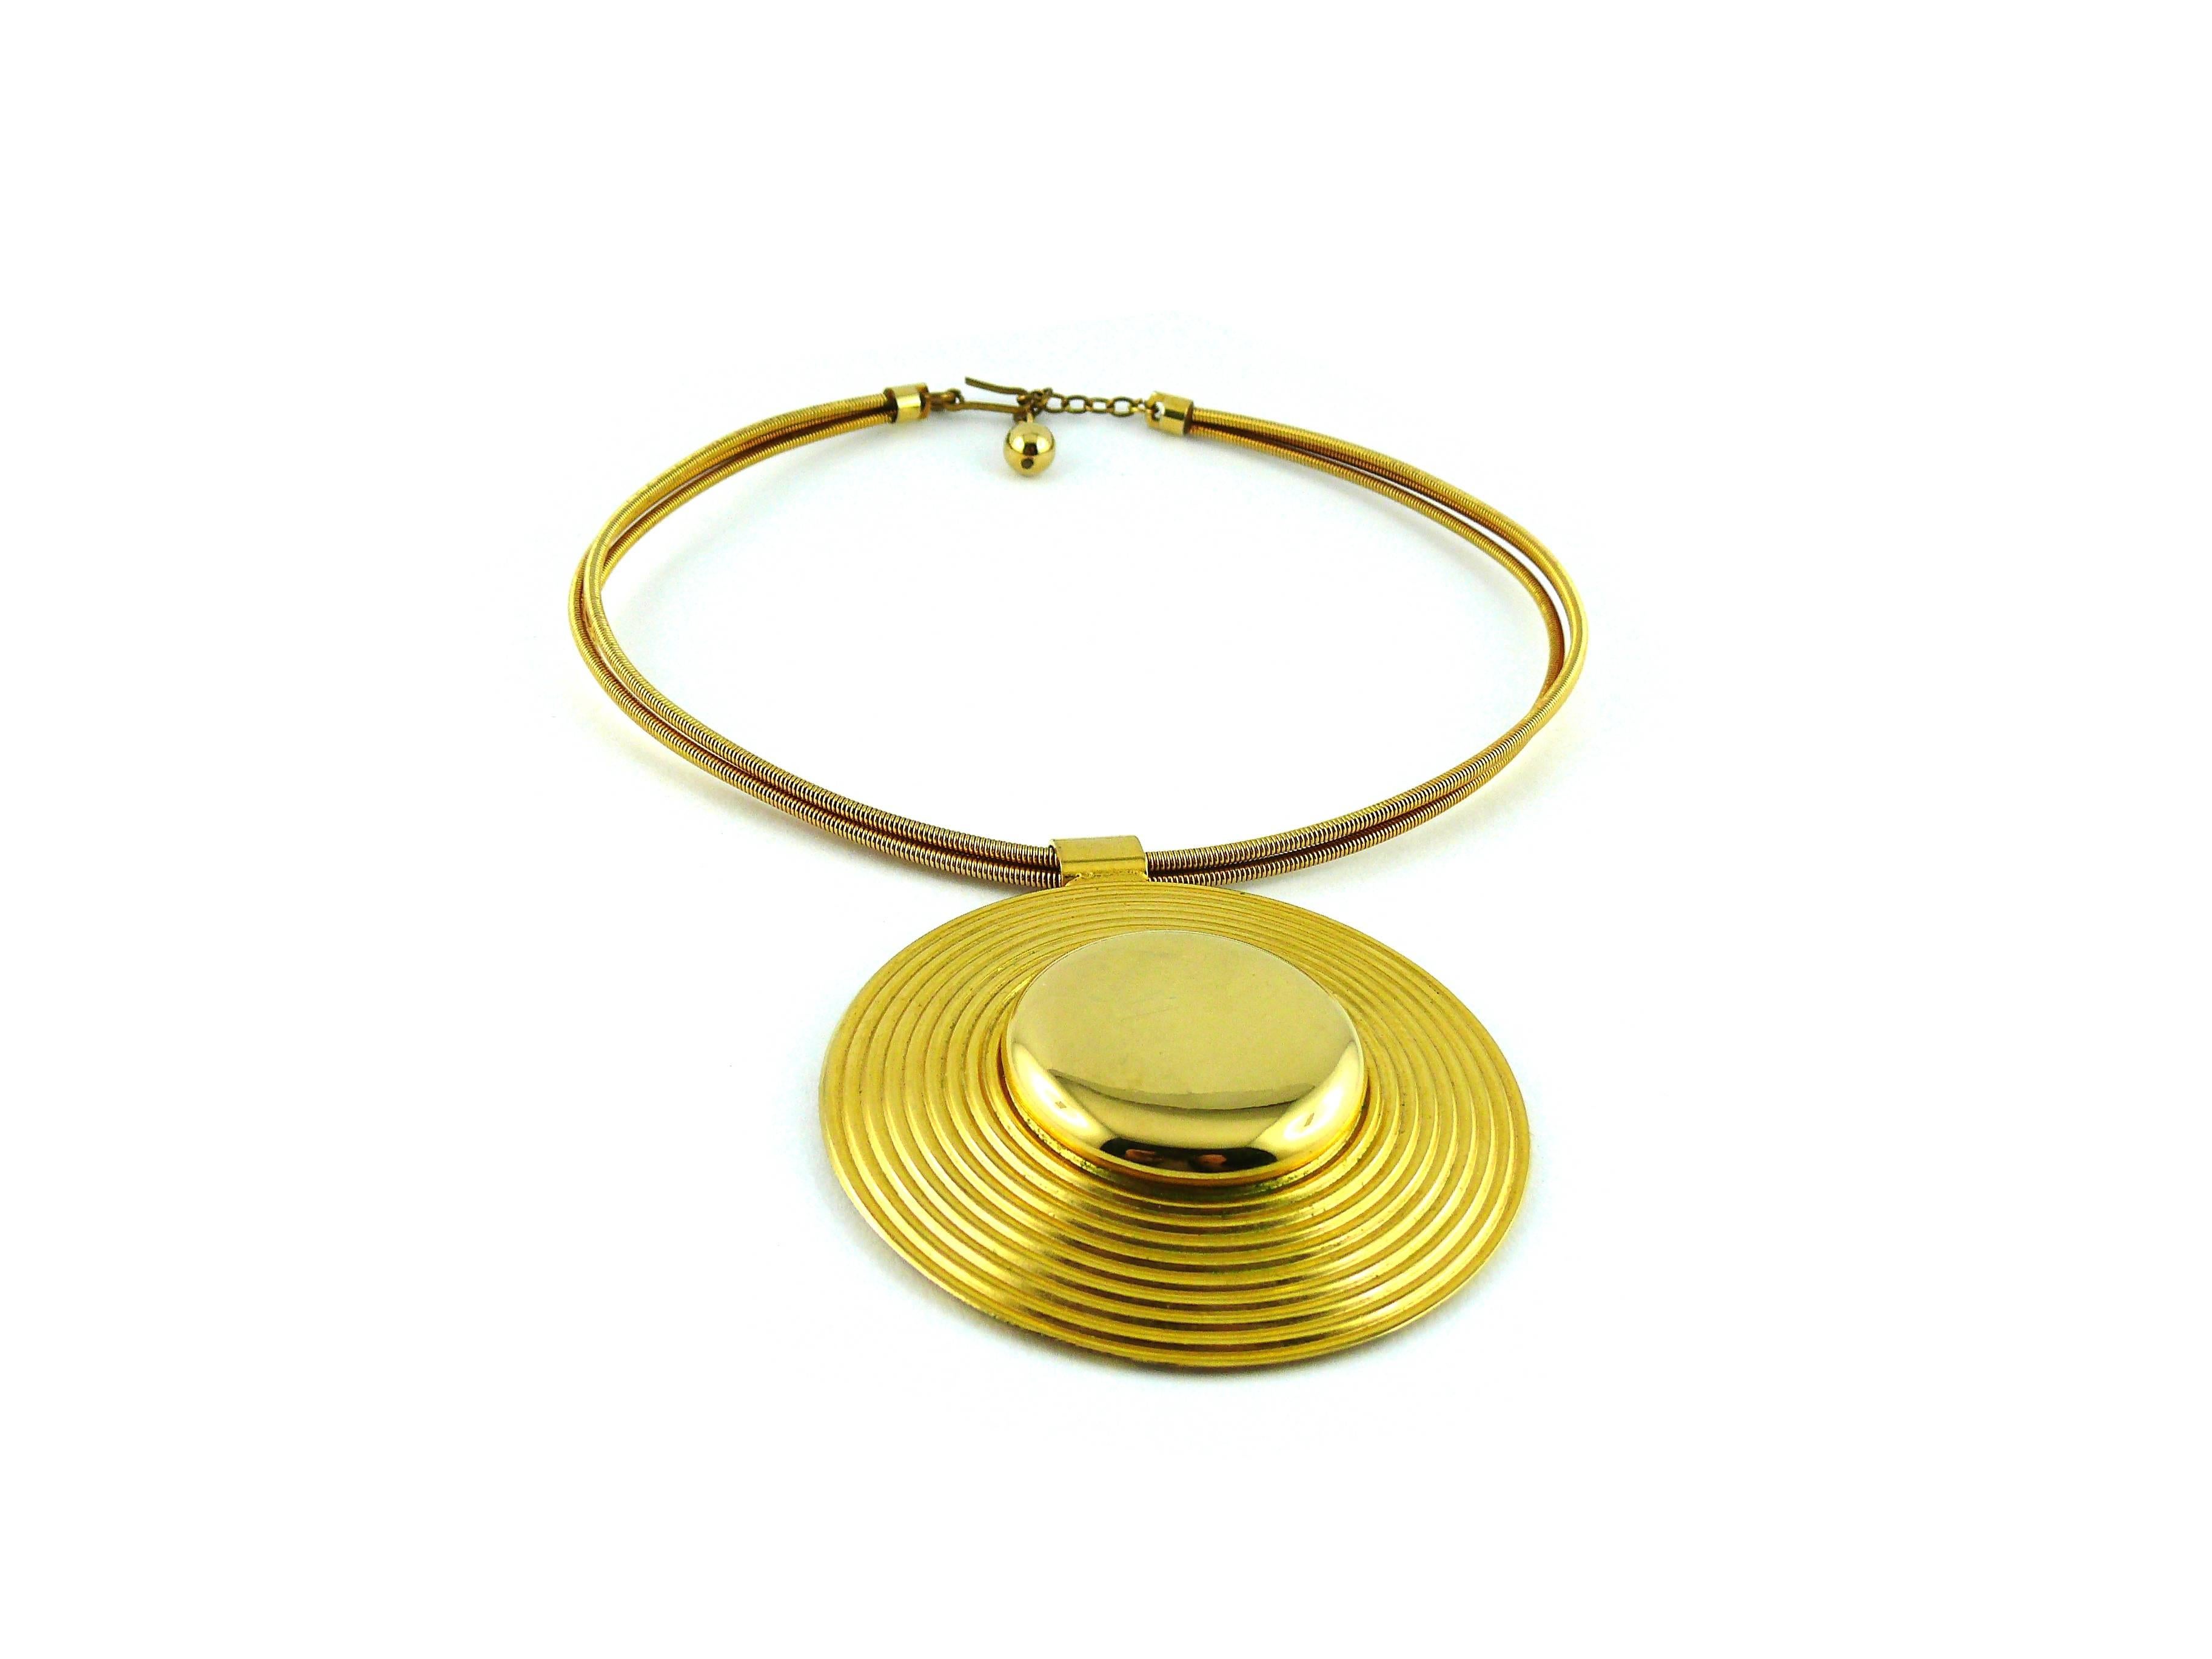 LANVIN vintage gold tone moderneit choker necklace featuring a semi rigid tubular chain and a massive disc pendant with concentric circle design.

Marked LANVIN Paris on the reverse of the pendant.

Indicative measurements : diameter approx. 13